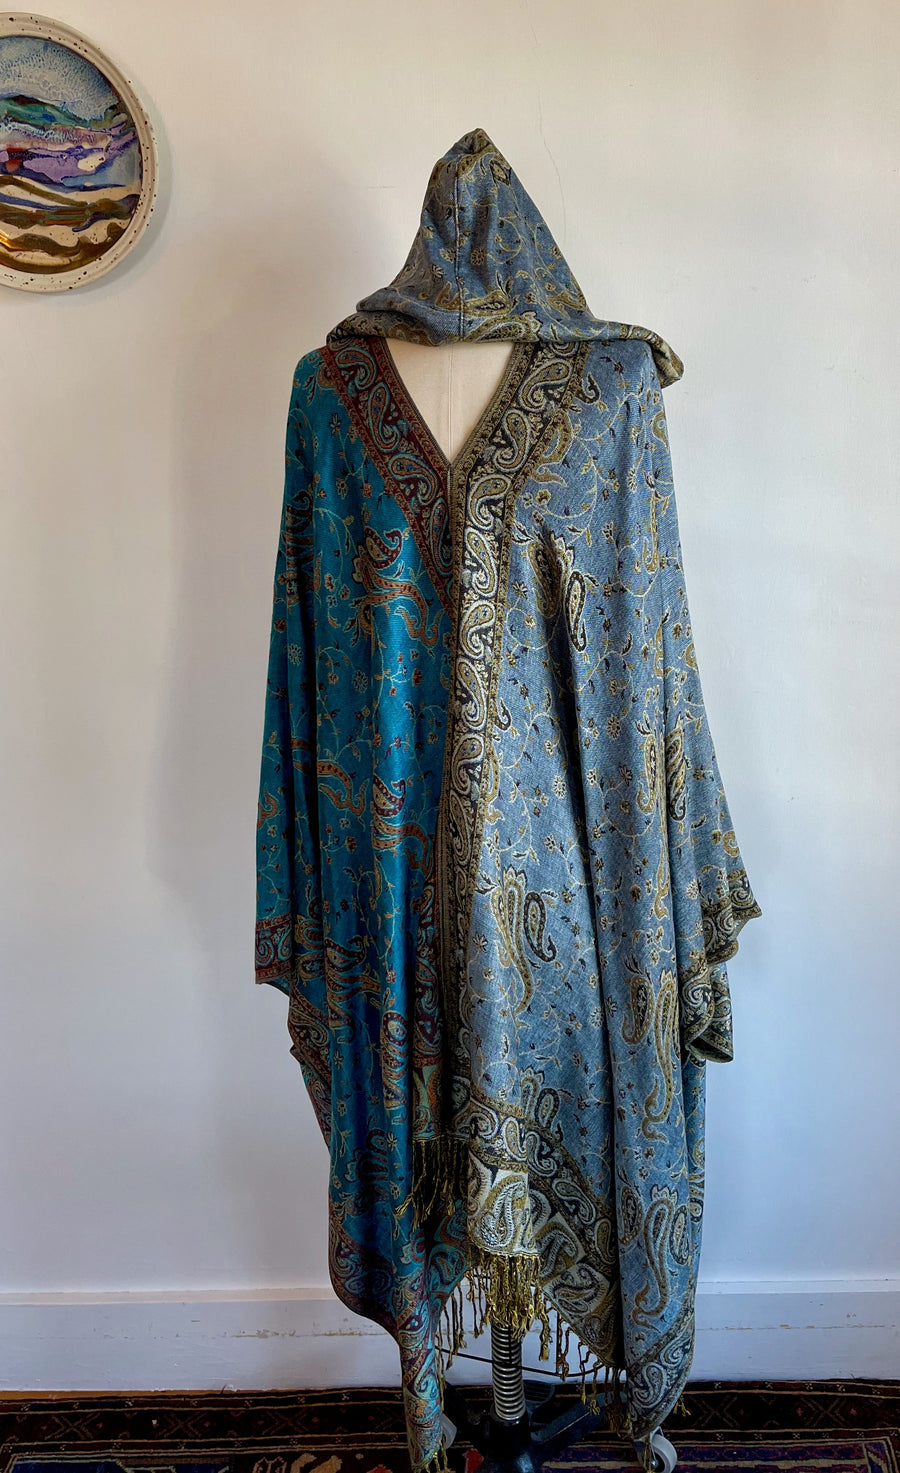 One Size Fits All.  Blue Moon Lunar Eclipse Hooded Flowy Poncho Robe Cloak Made To Order